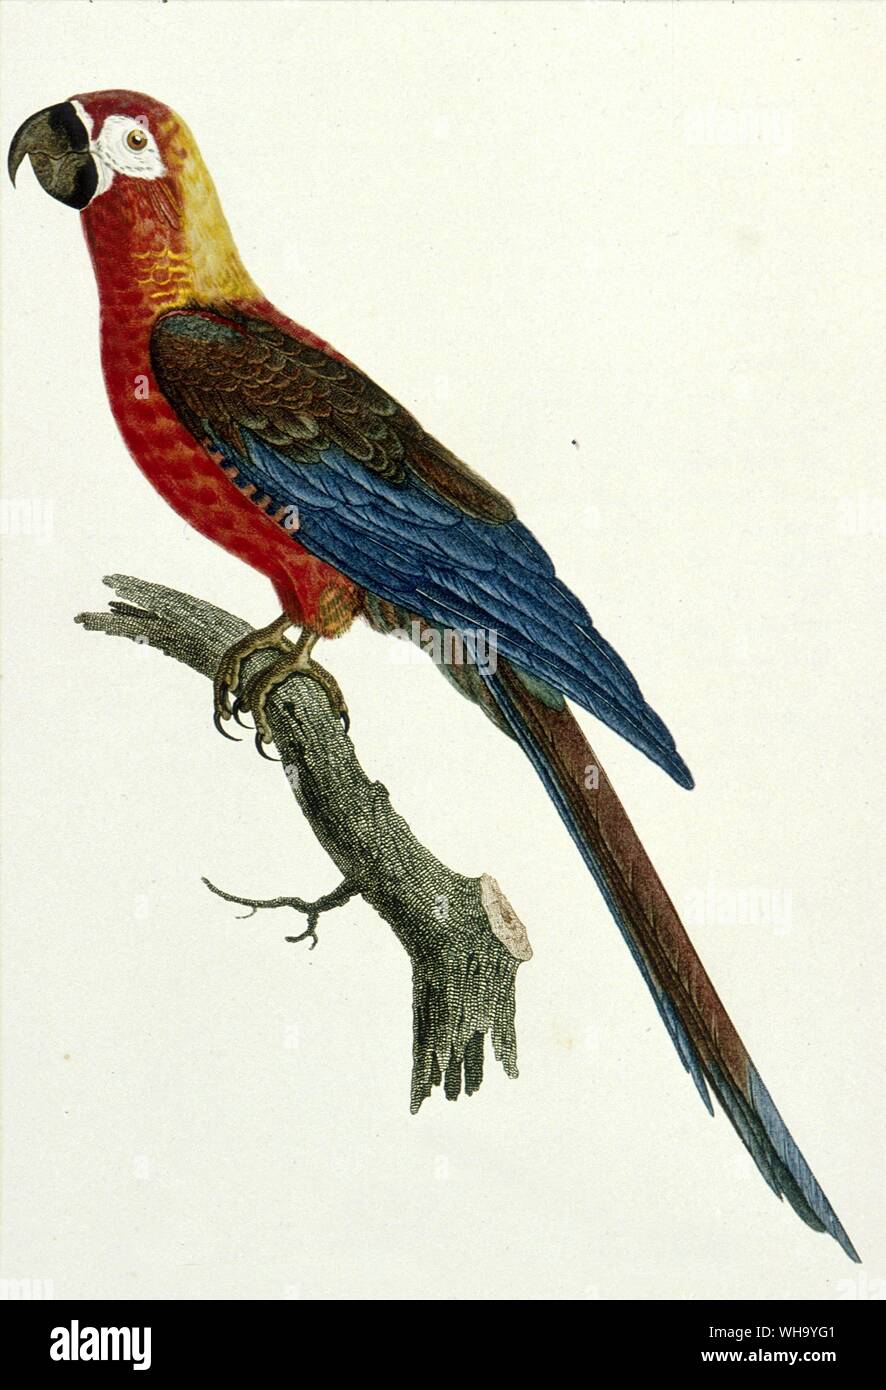 Cuban Red Macaw. Coloured engraving by Jacques Barraband from F. Levaillant's Histoire Naturelle des Perroquets, Vol. 1 (Paris, 1801-5), Pl.5. - Length of bird 50cm (20in) Stock Photo